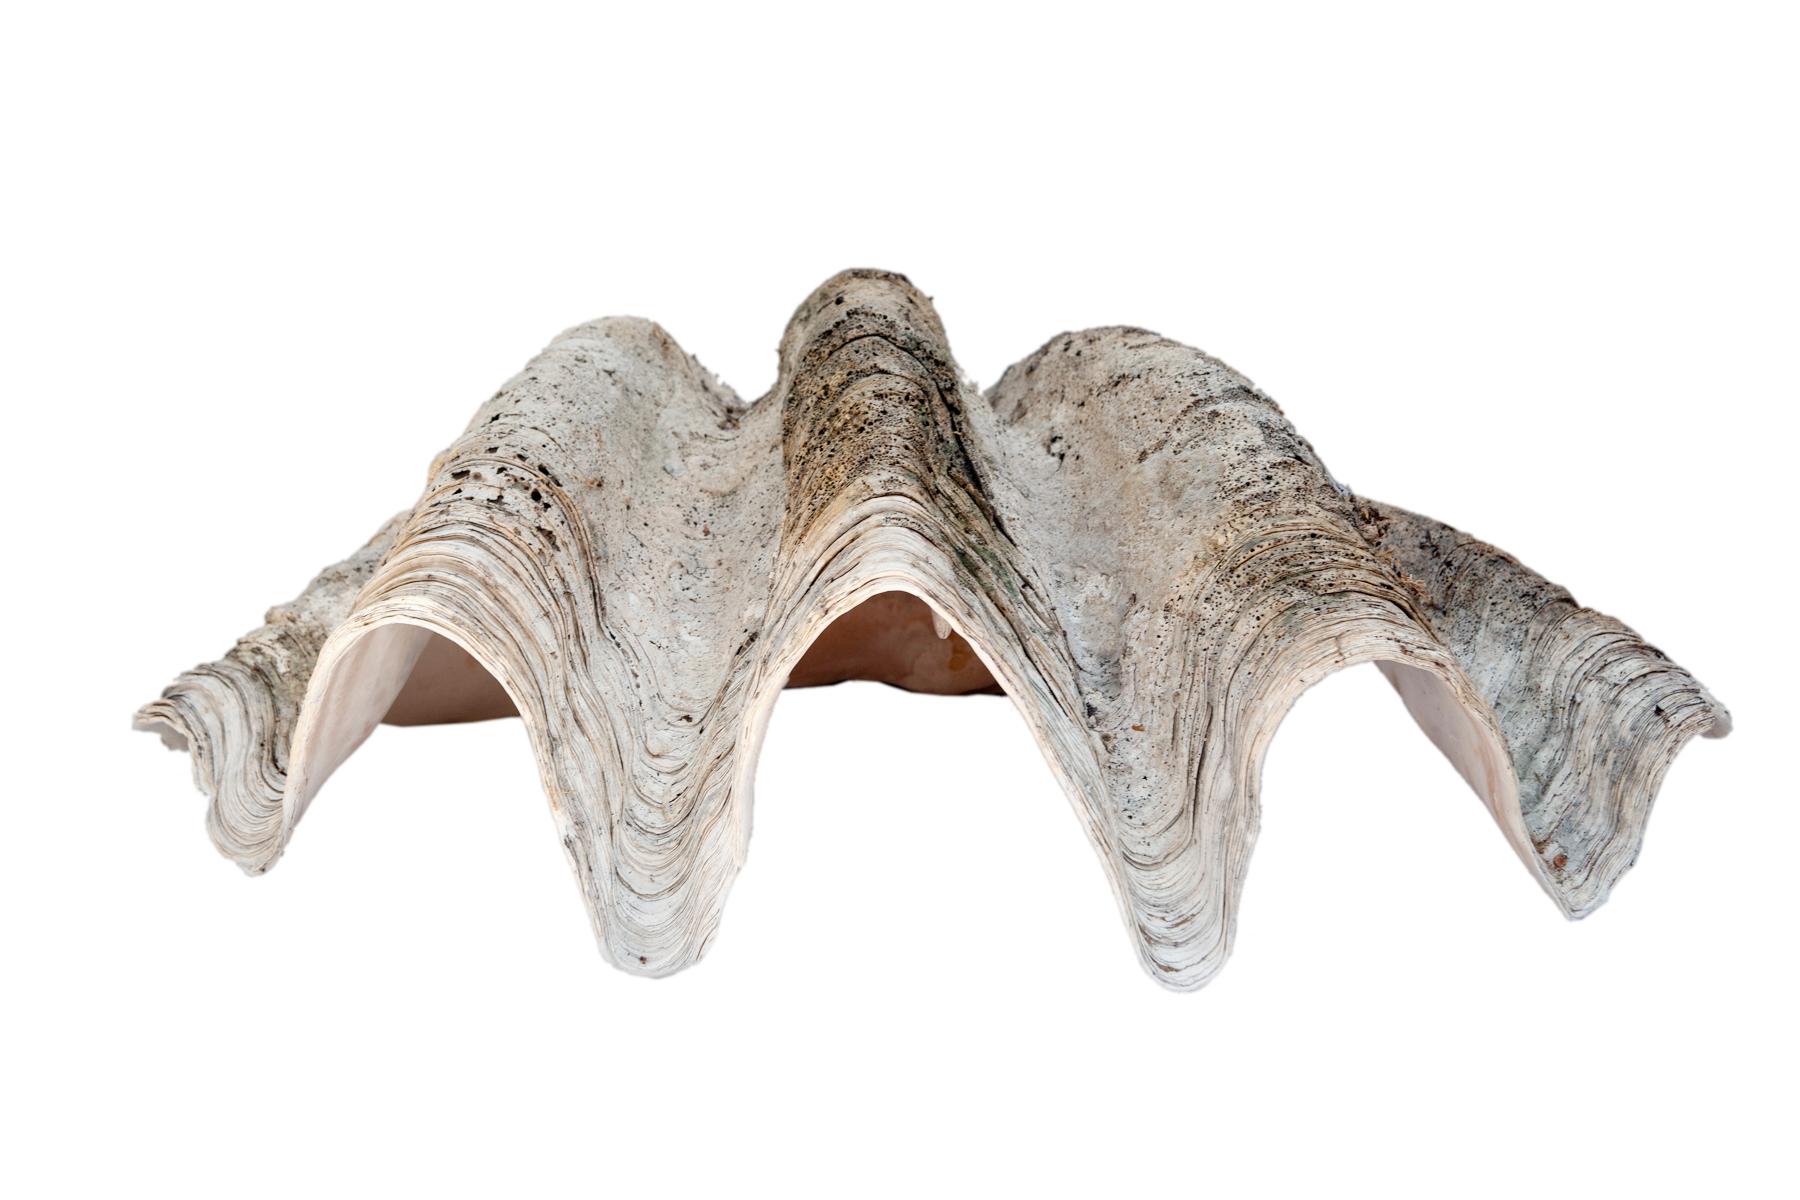 19th Century South Pacific Natural Giant Clam Shell Specimen For Sale